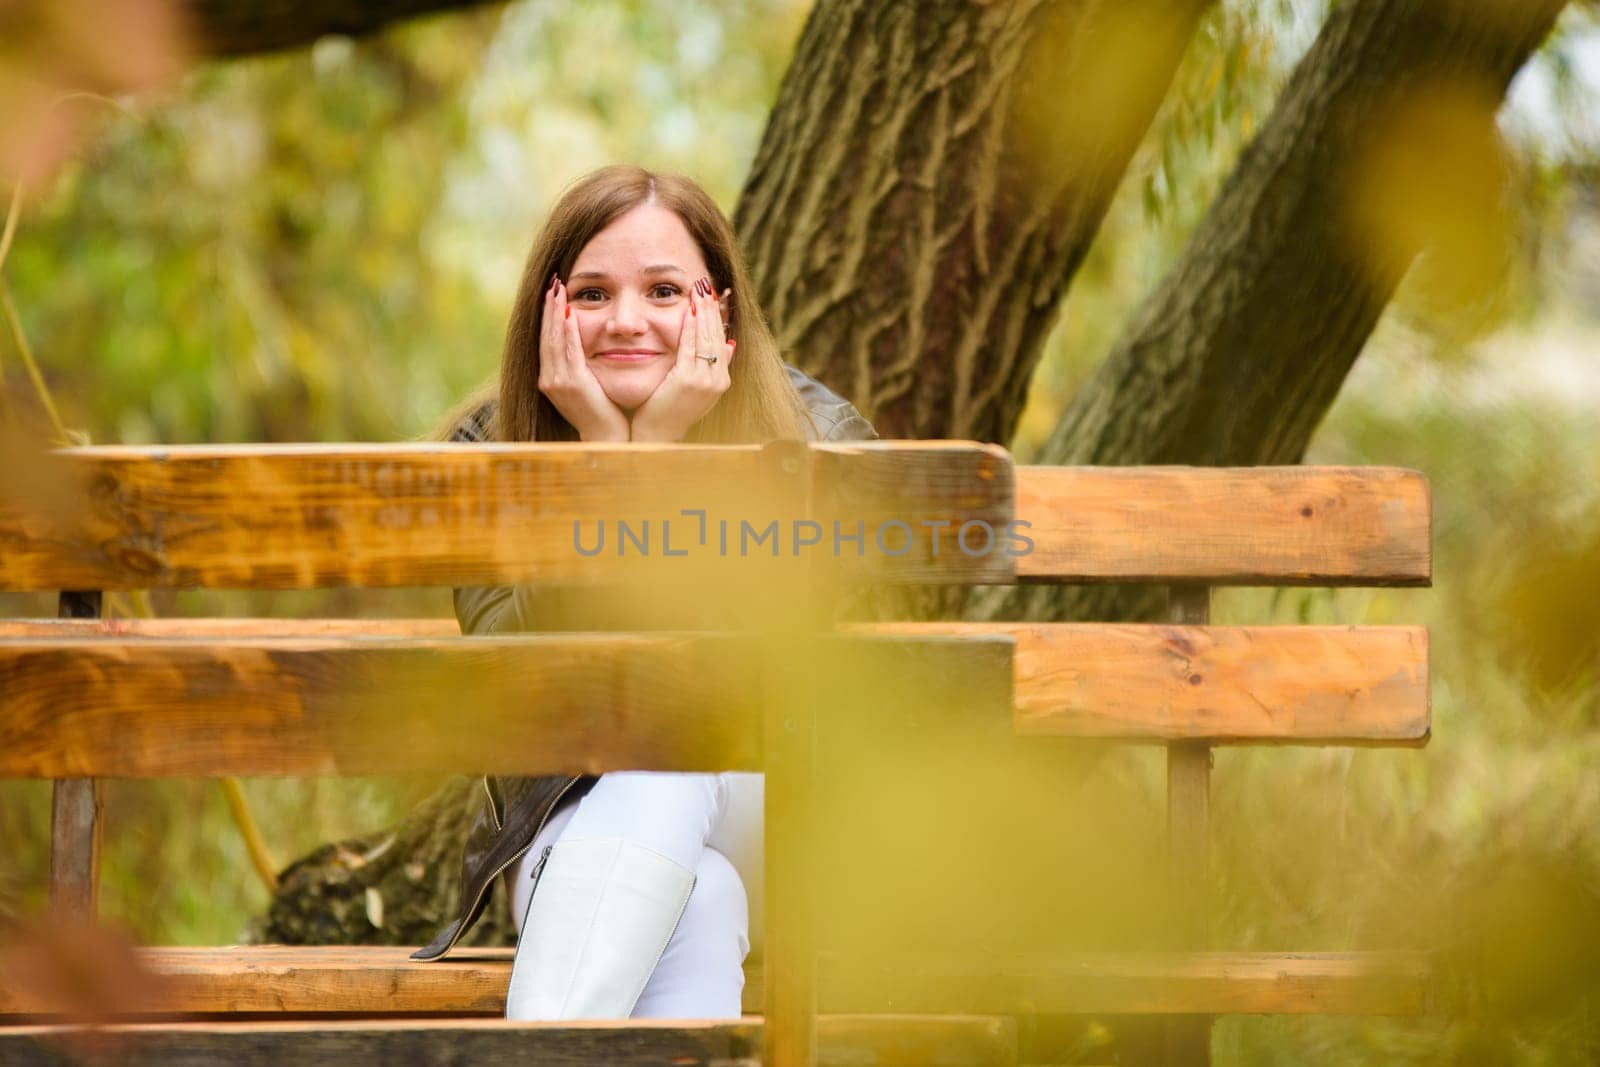 A young beautiful girl sits on a bench in an autumn park and looks cheerfully into the frame a